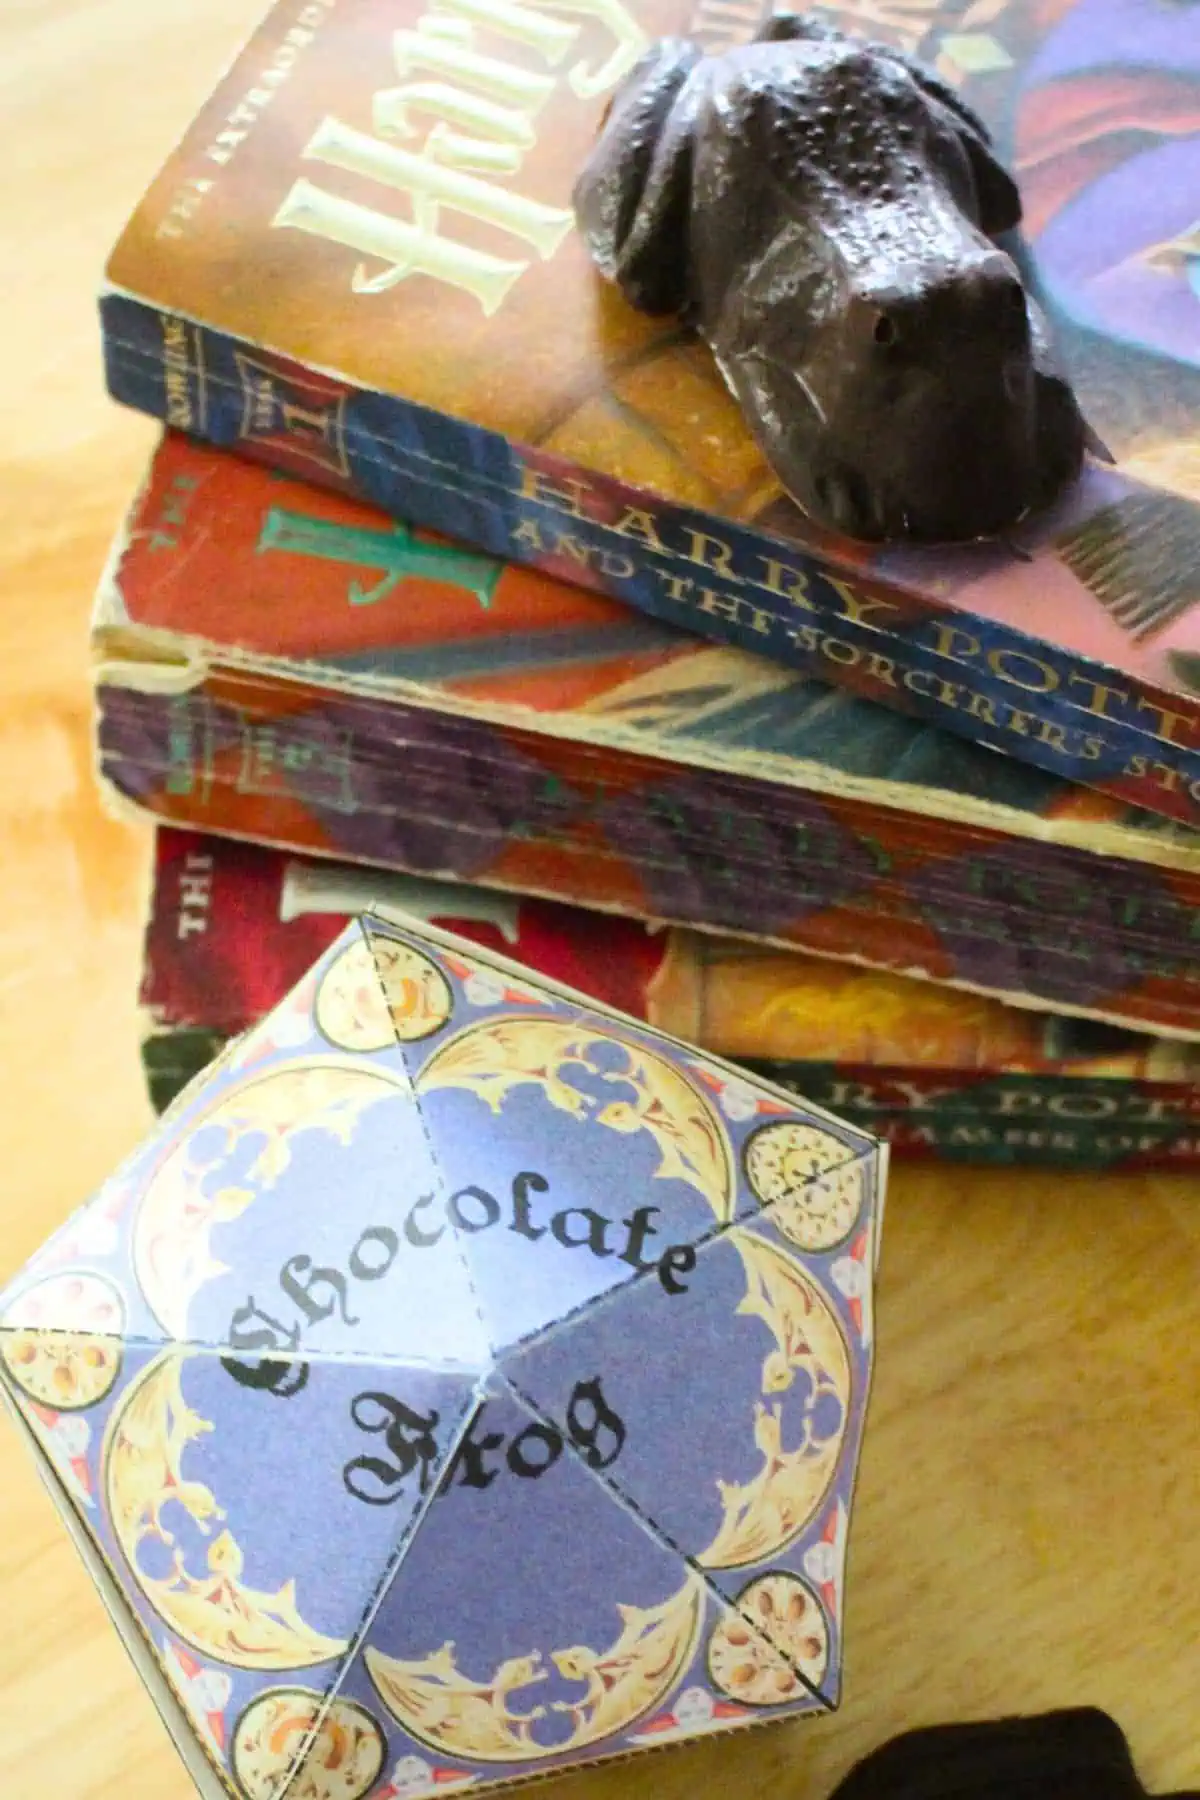 Harry potter books stacked with a chocolate frog on top, a chocolate frog box to the side